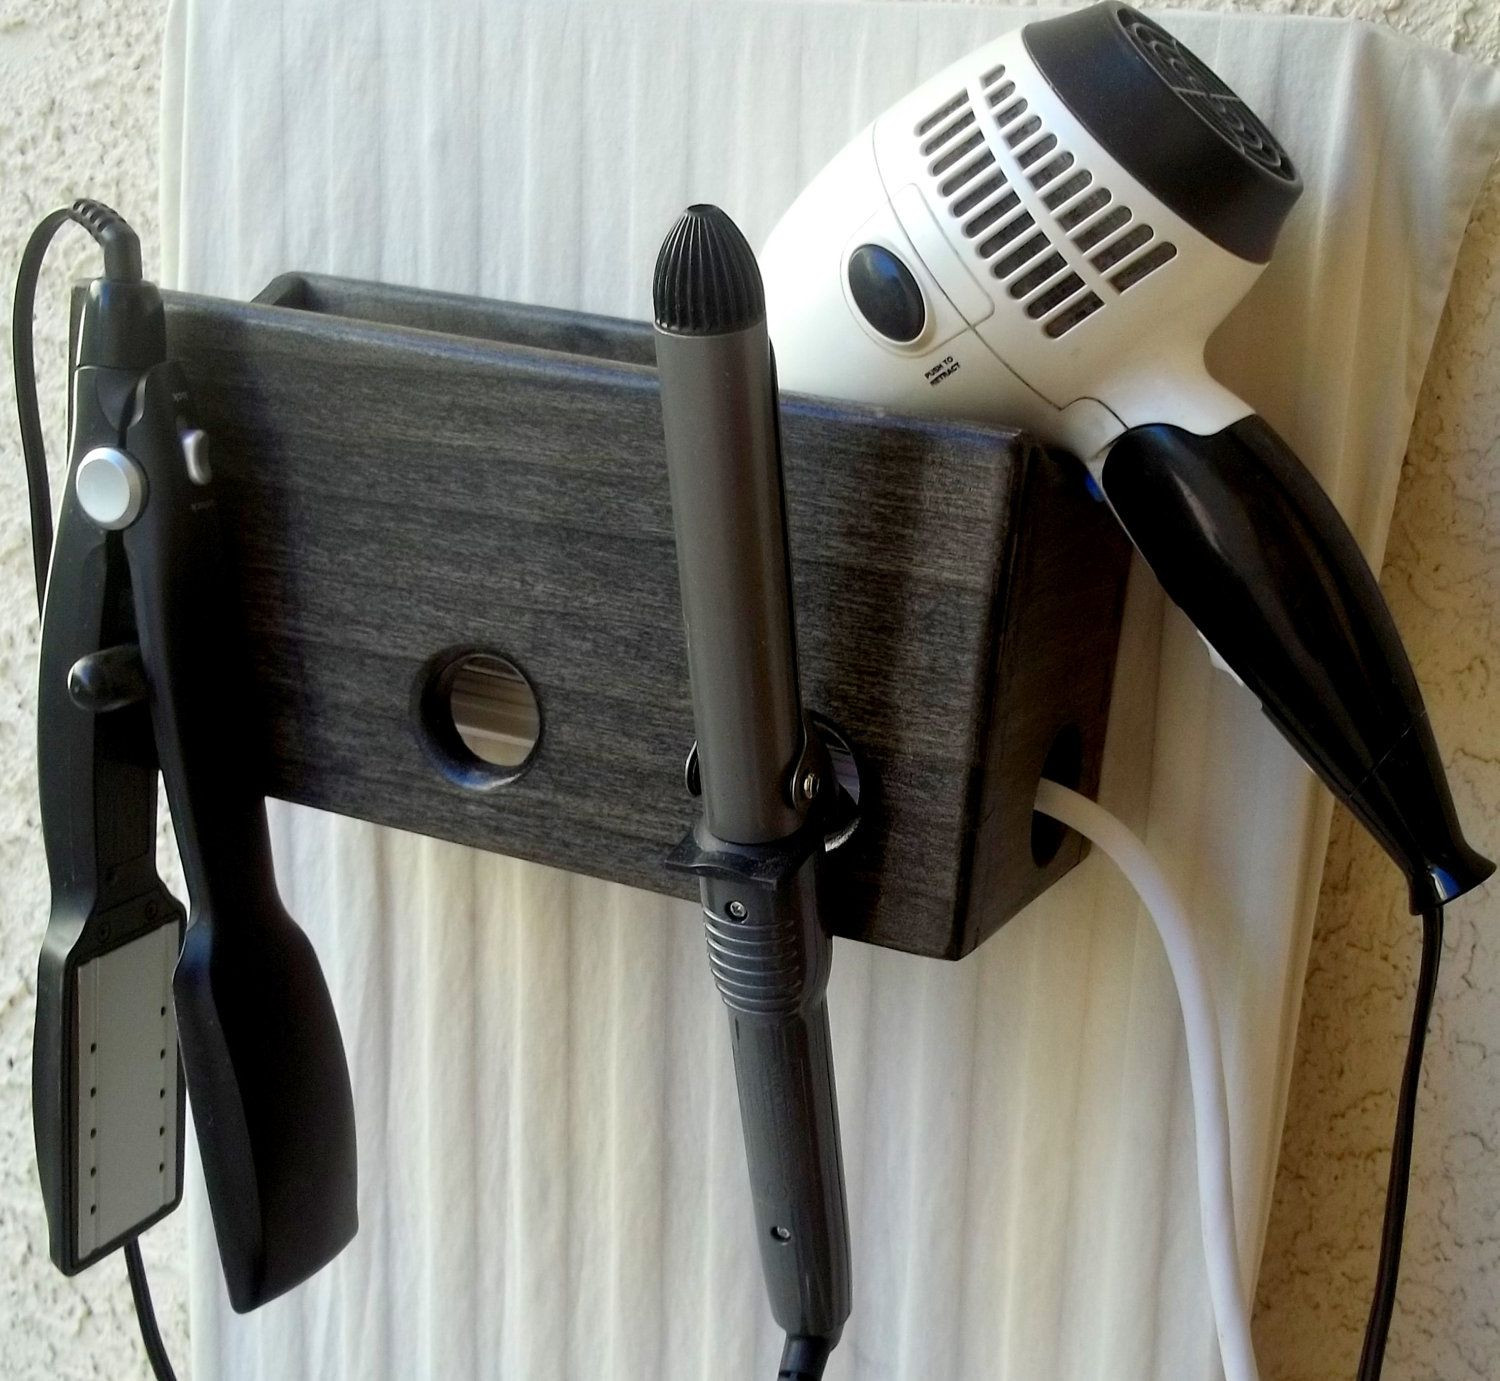 DIY Hair Dryer And Curling Iron Holder
 Bathroom Organizer Curling Iron Hair Dryer and by